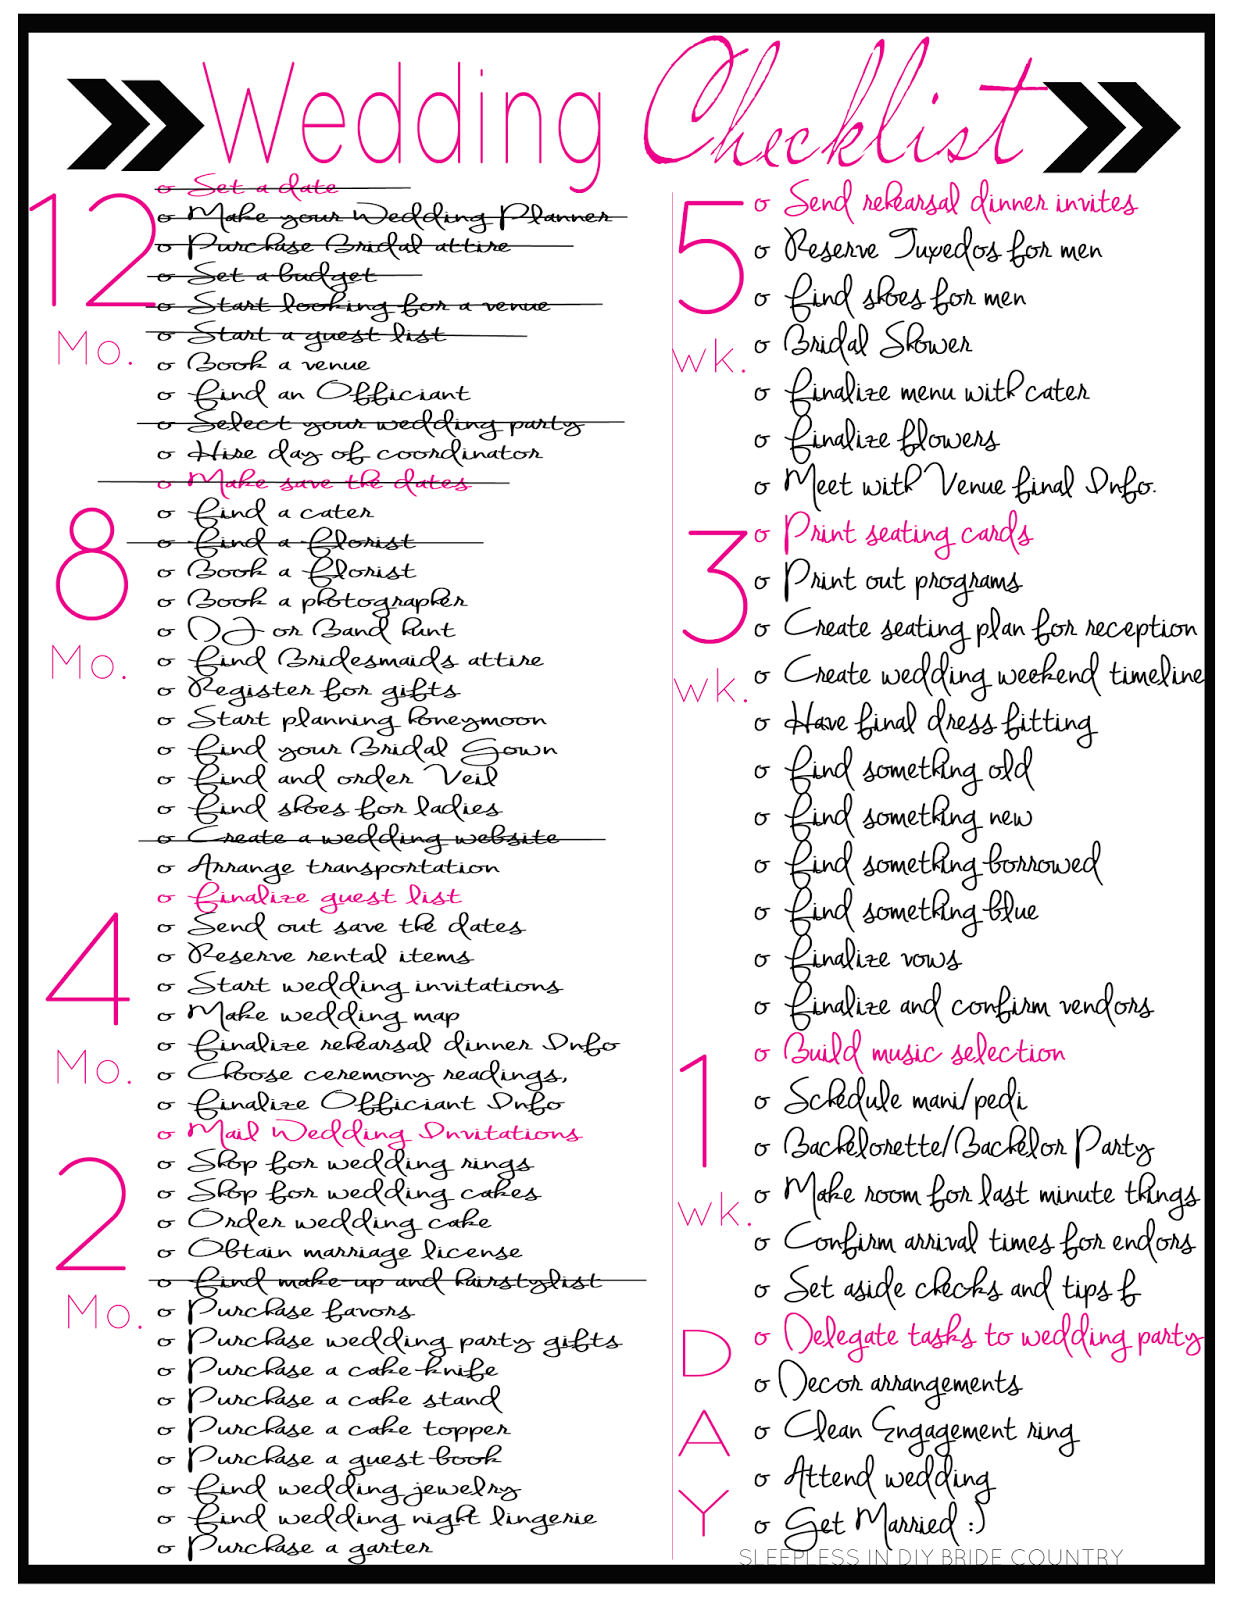 sleepless-in-diy-bride-country-budget-bride-wedding-checklist-and-budget-tips